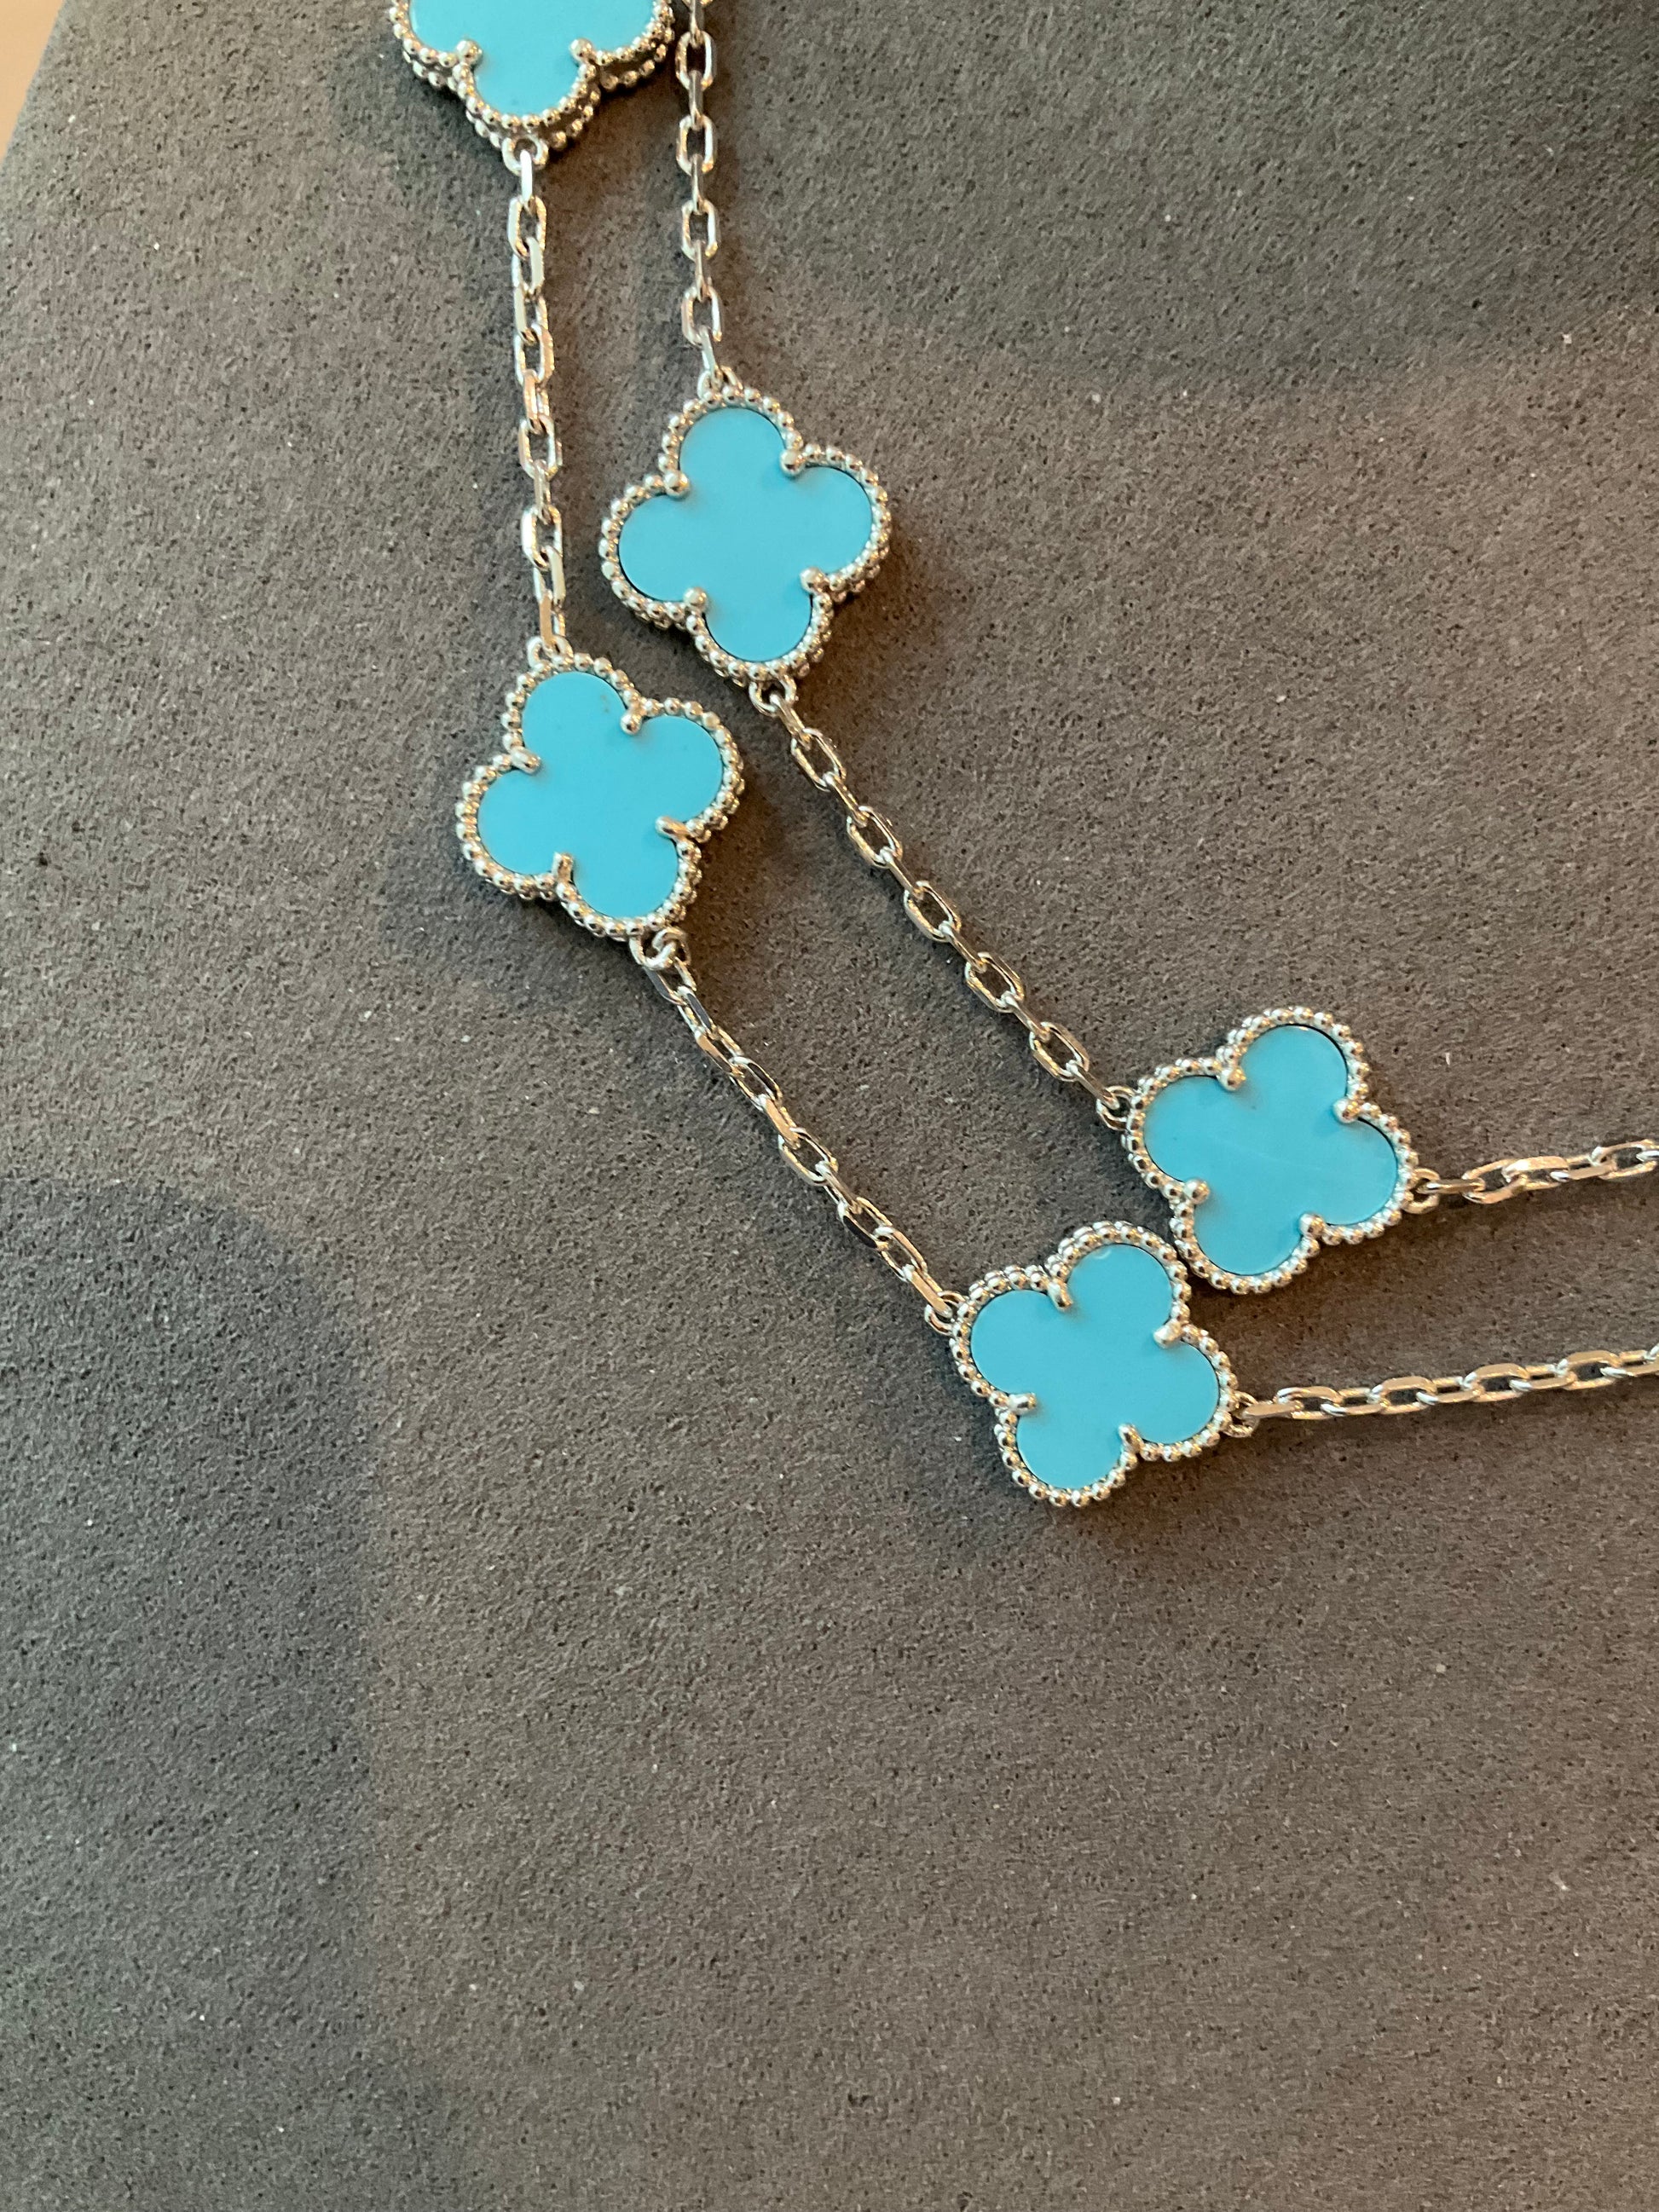 20 motifs Turquoise White Gold Plated Four Leaf Clover Flower Style S 925 Silver Necklace 84cm - ParadiseKissCo